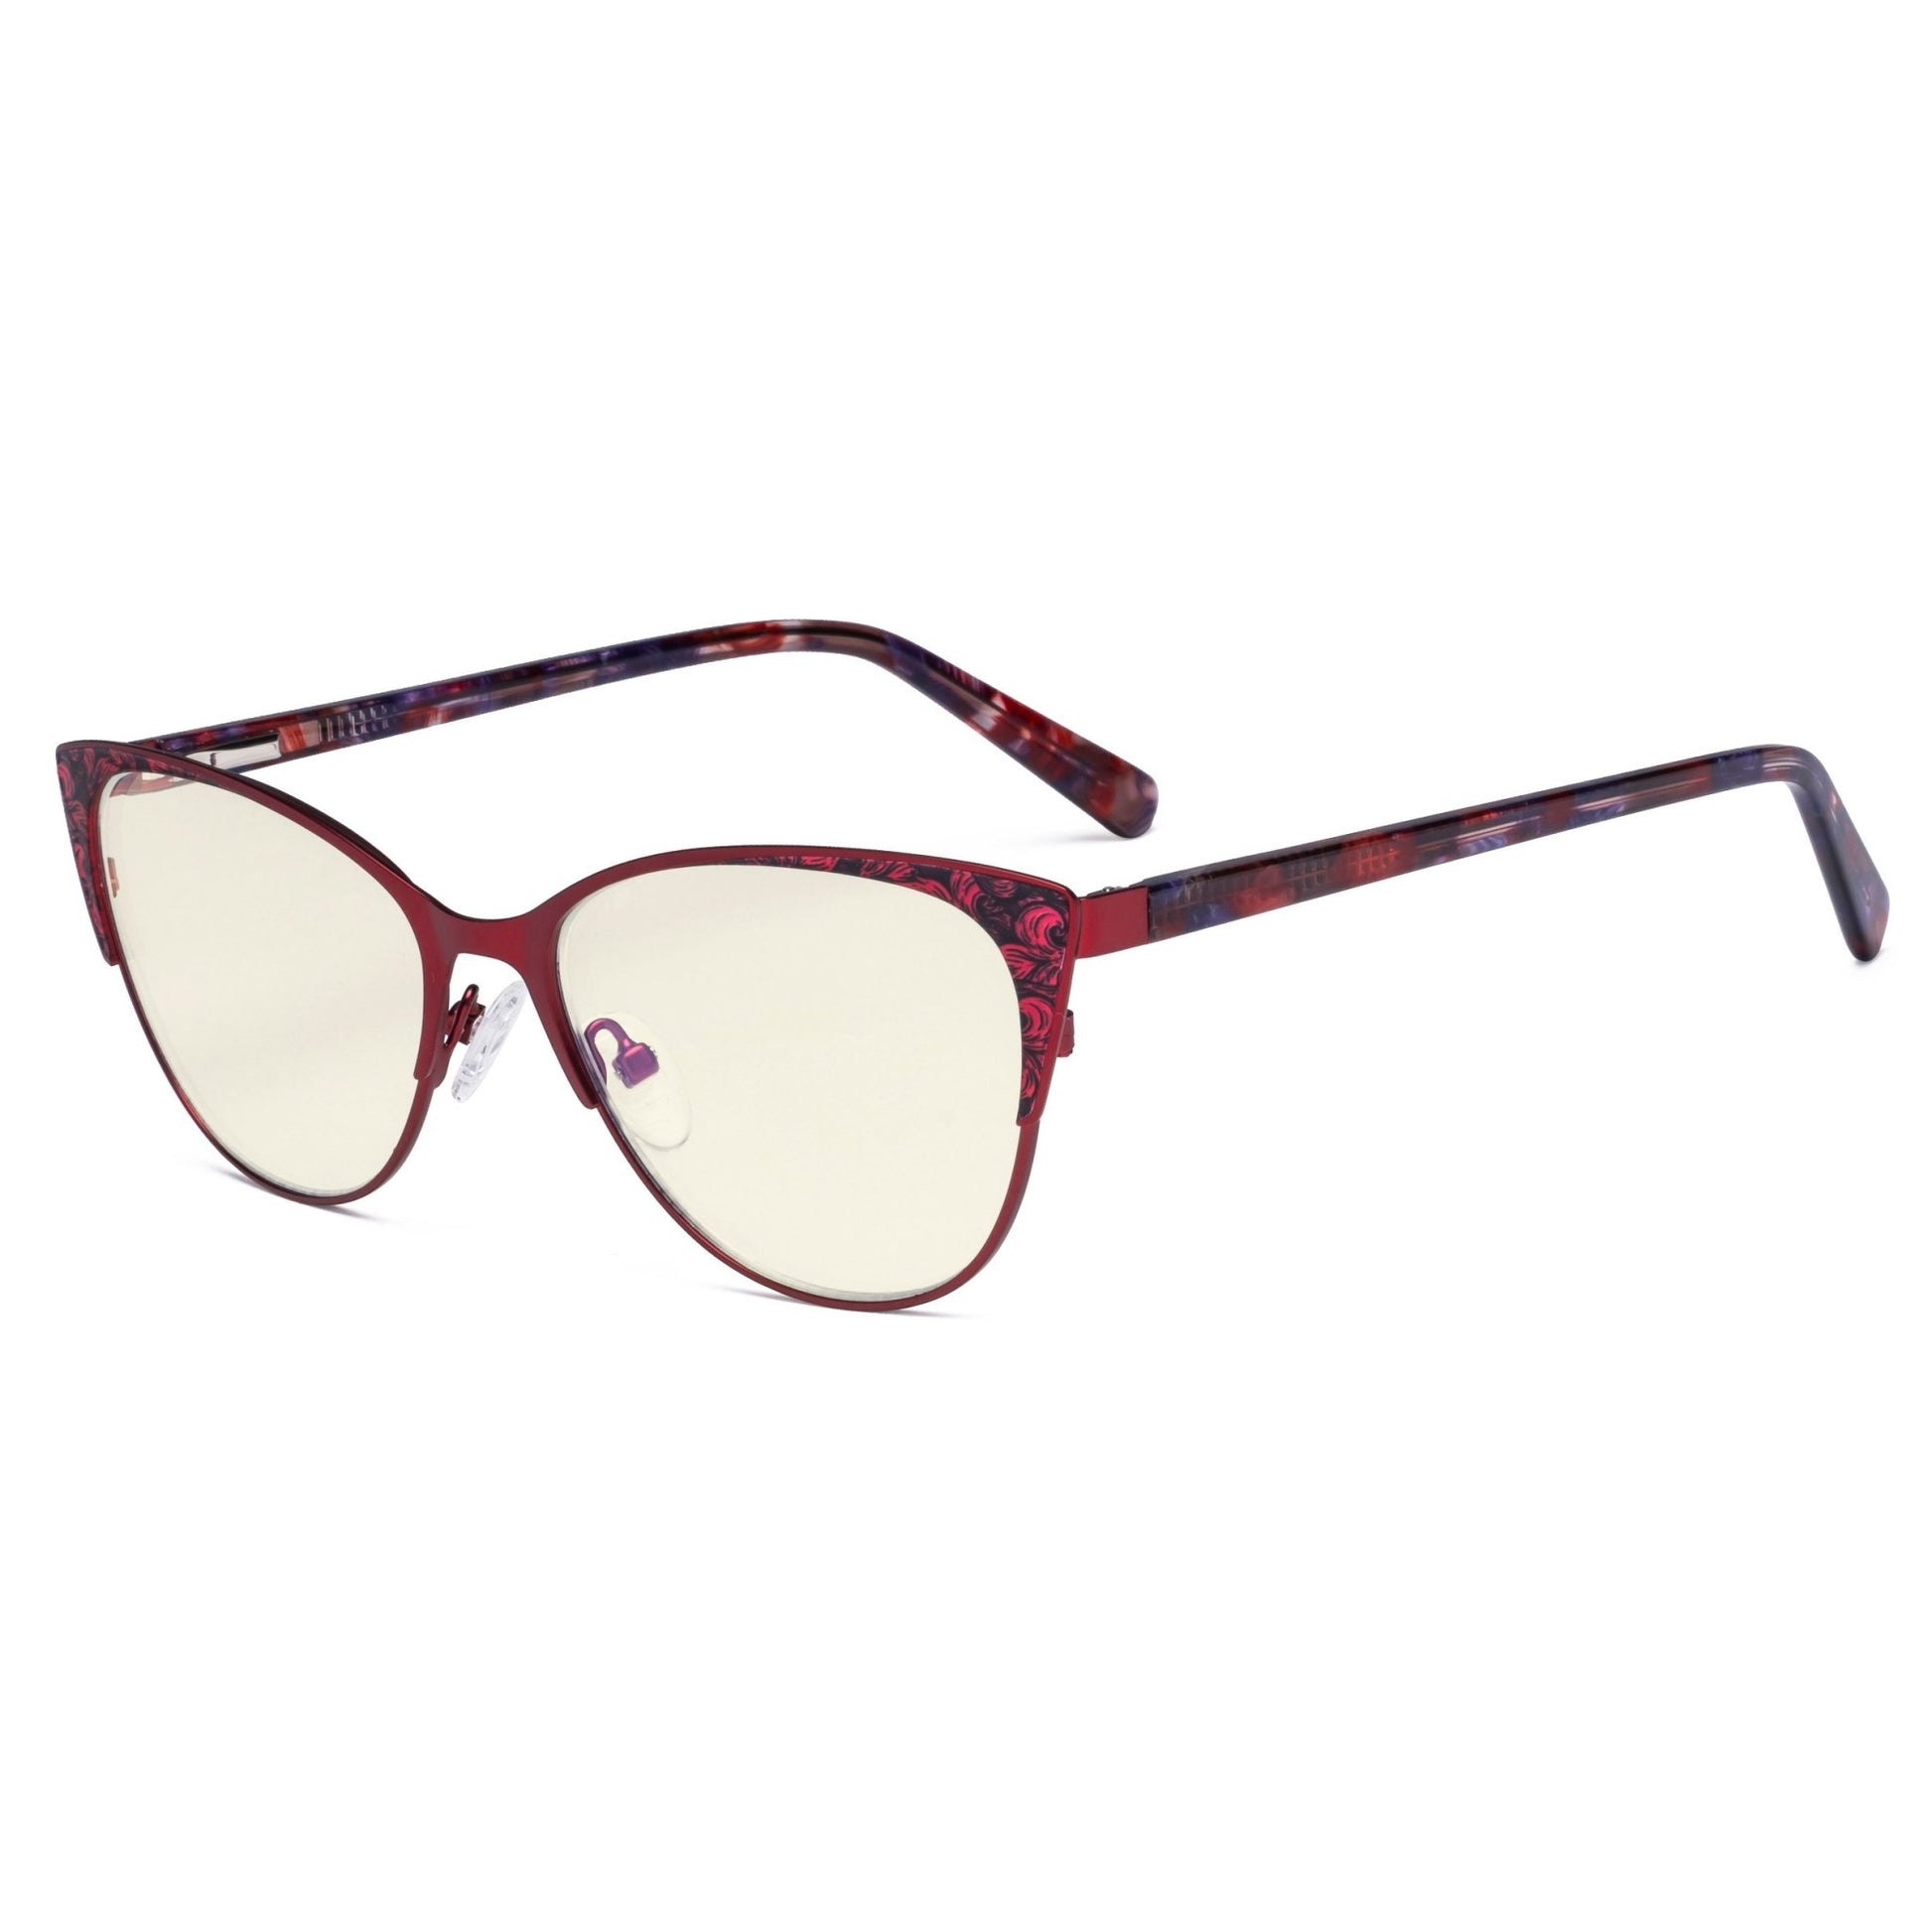 Butterfly Design Computer Eyeglasses Red LX19044-BB40